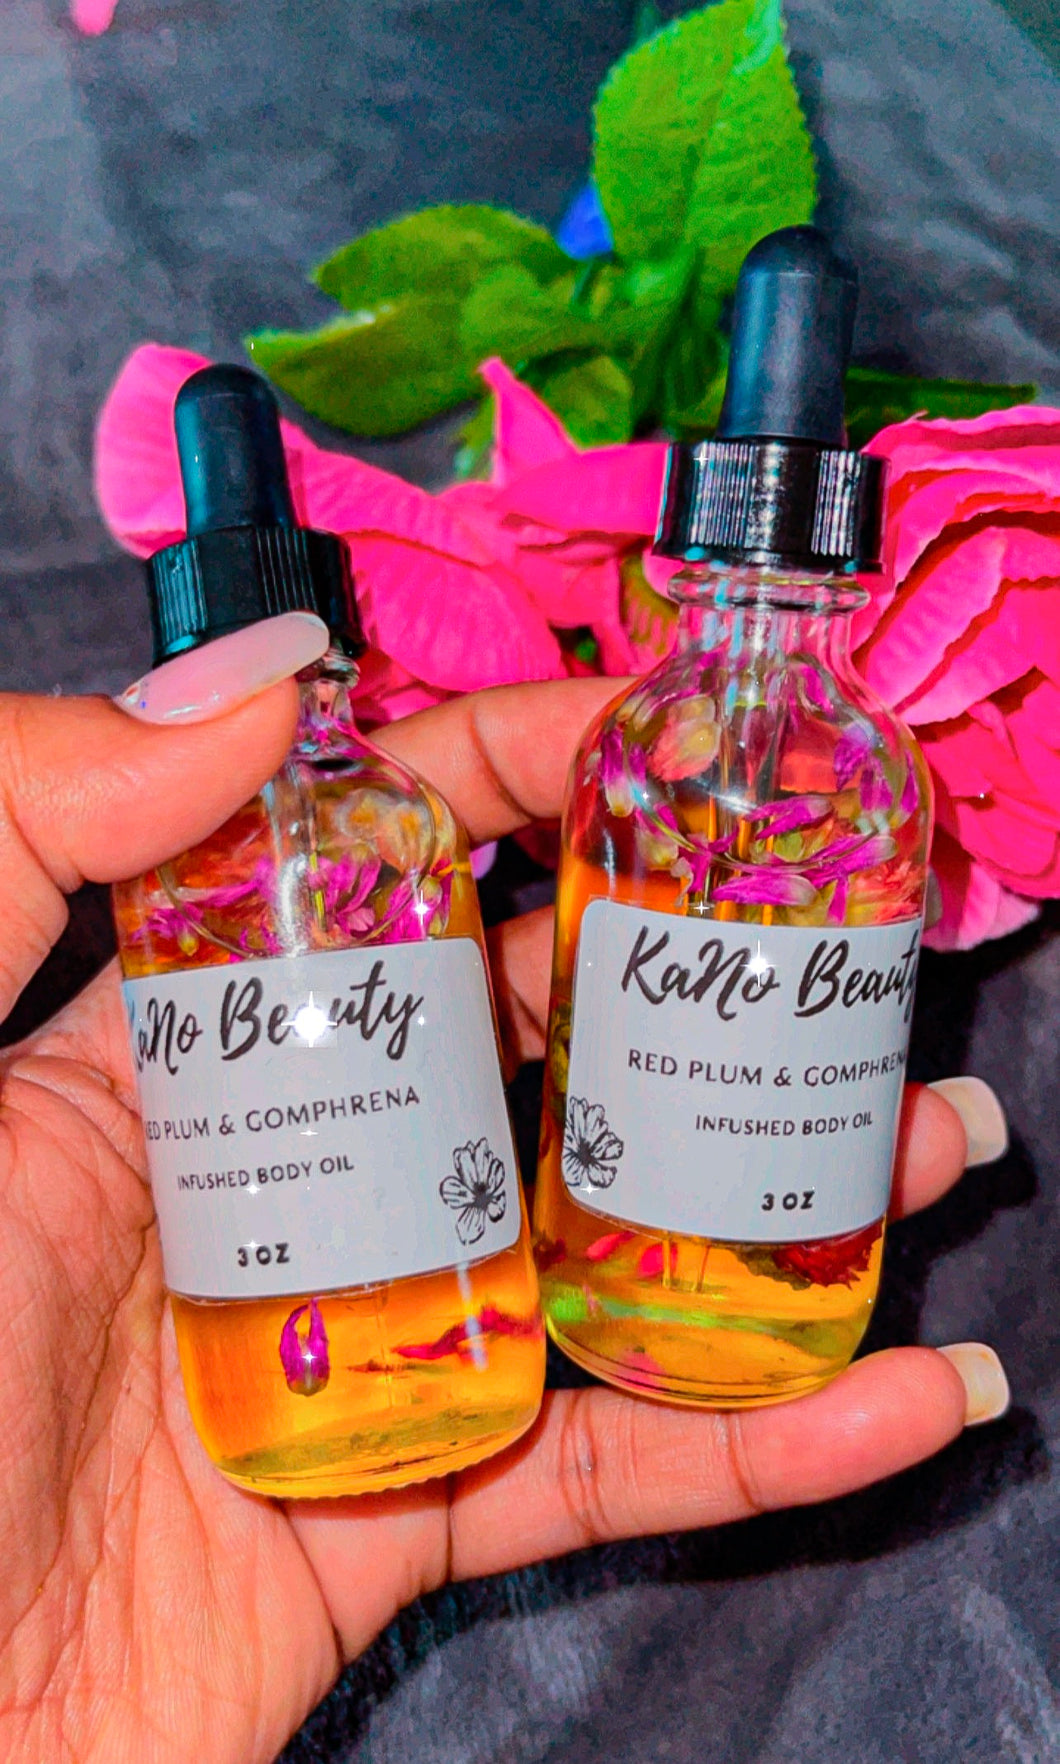 Red Plum & Gomphrena Infused body Oil - KaNo Beauty.Co